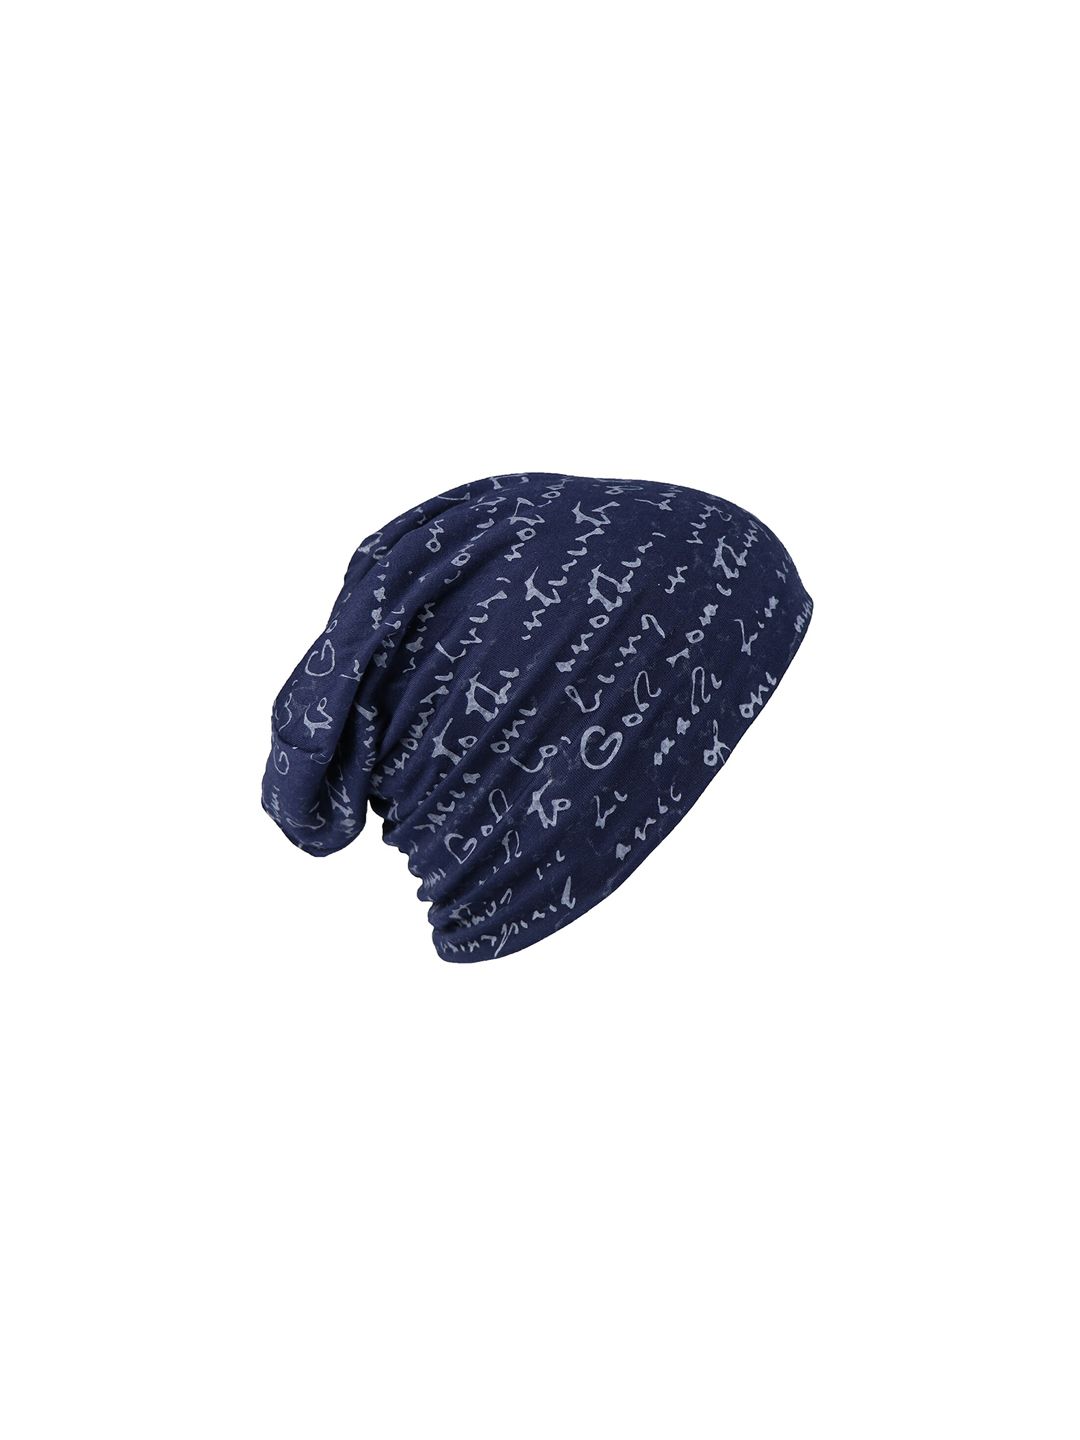 iSWEVEN Unisex Navy Blue & White Printed Beanie Price in India